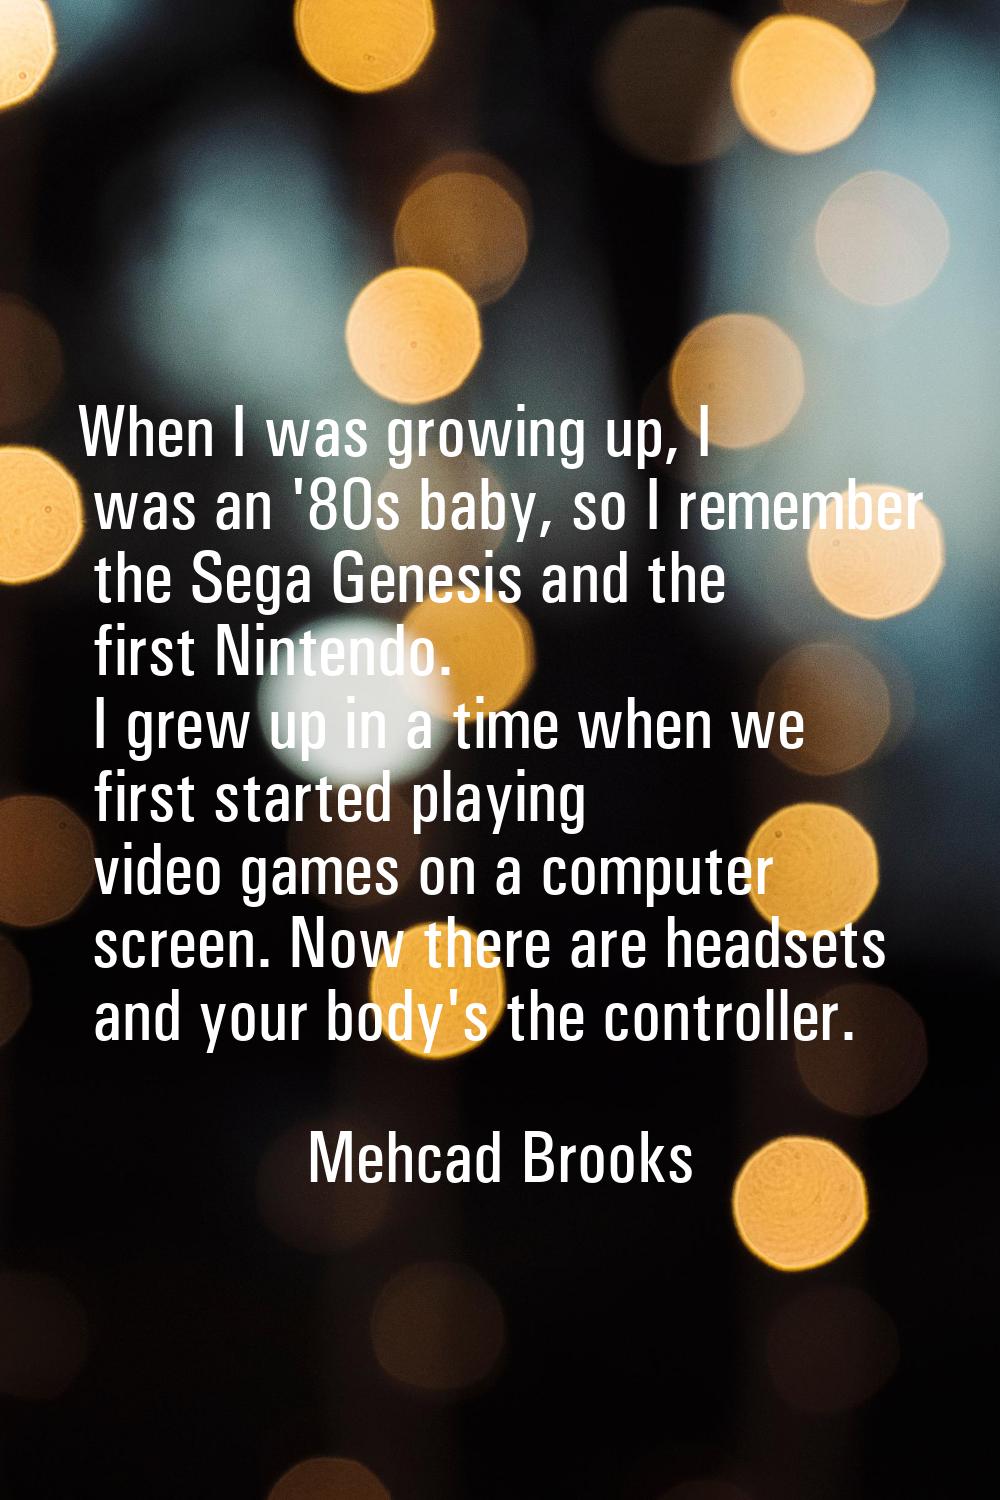 When I was growing up, I was an '80s baby, so I remember the Sega Genesis and the first Nintendo. I